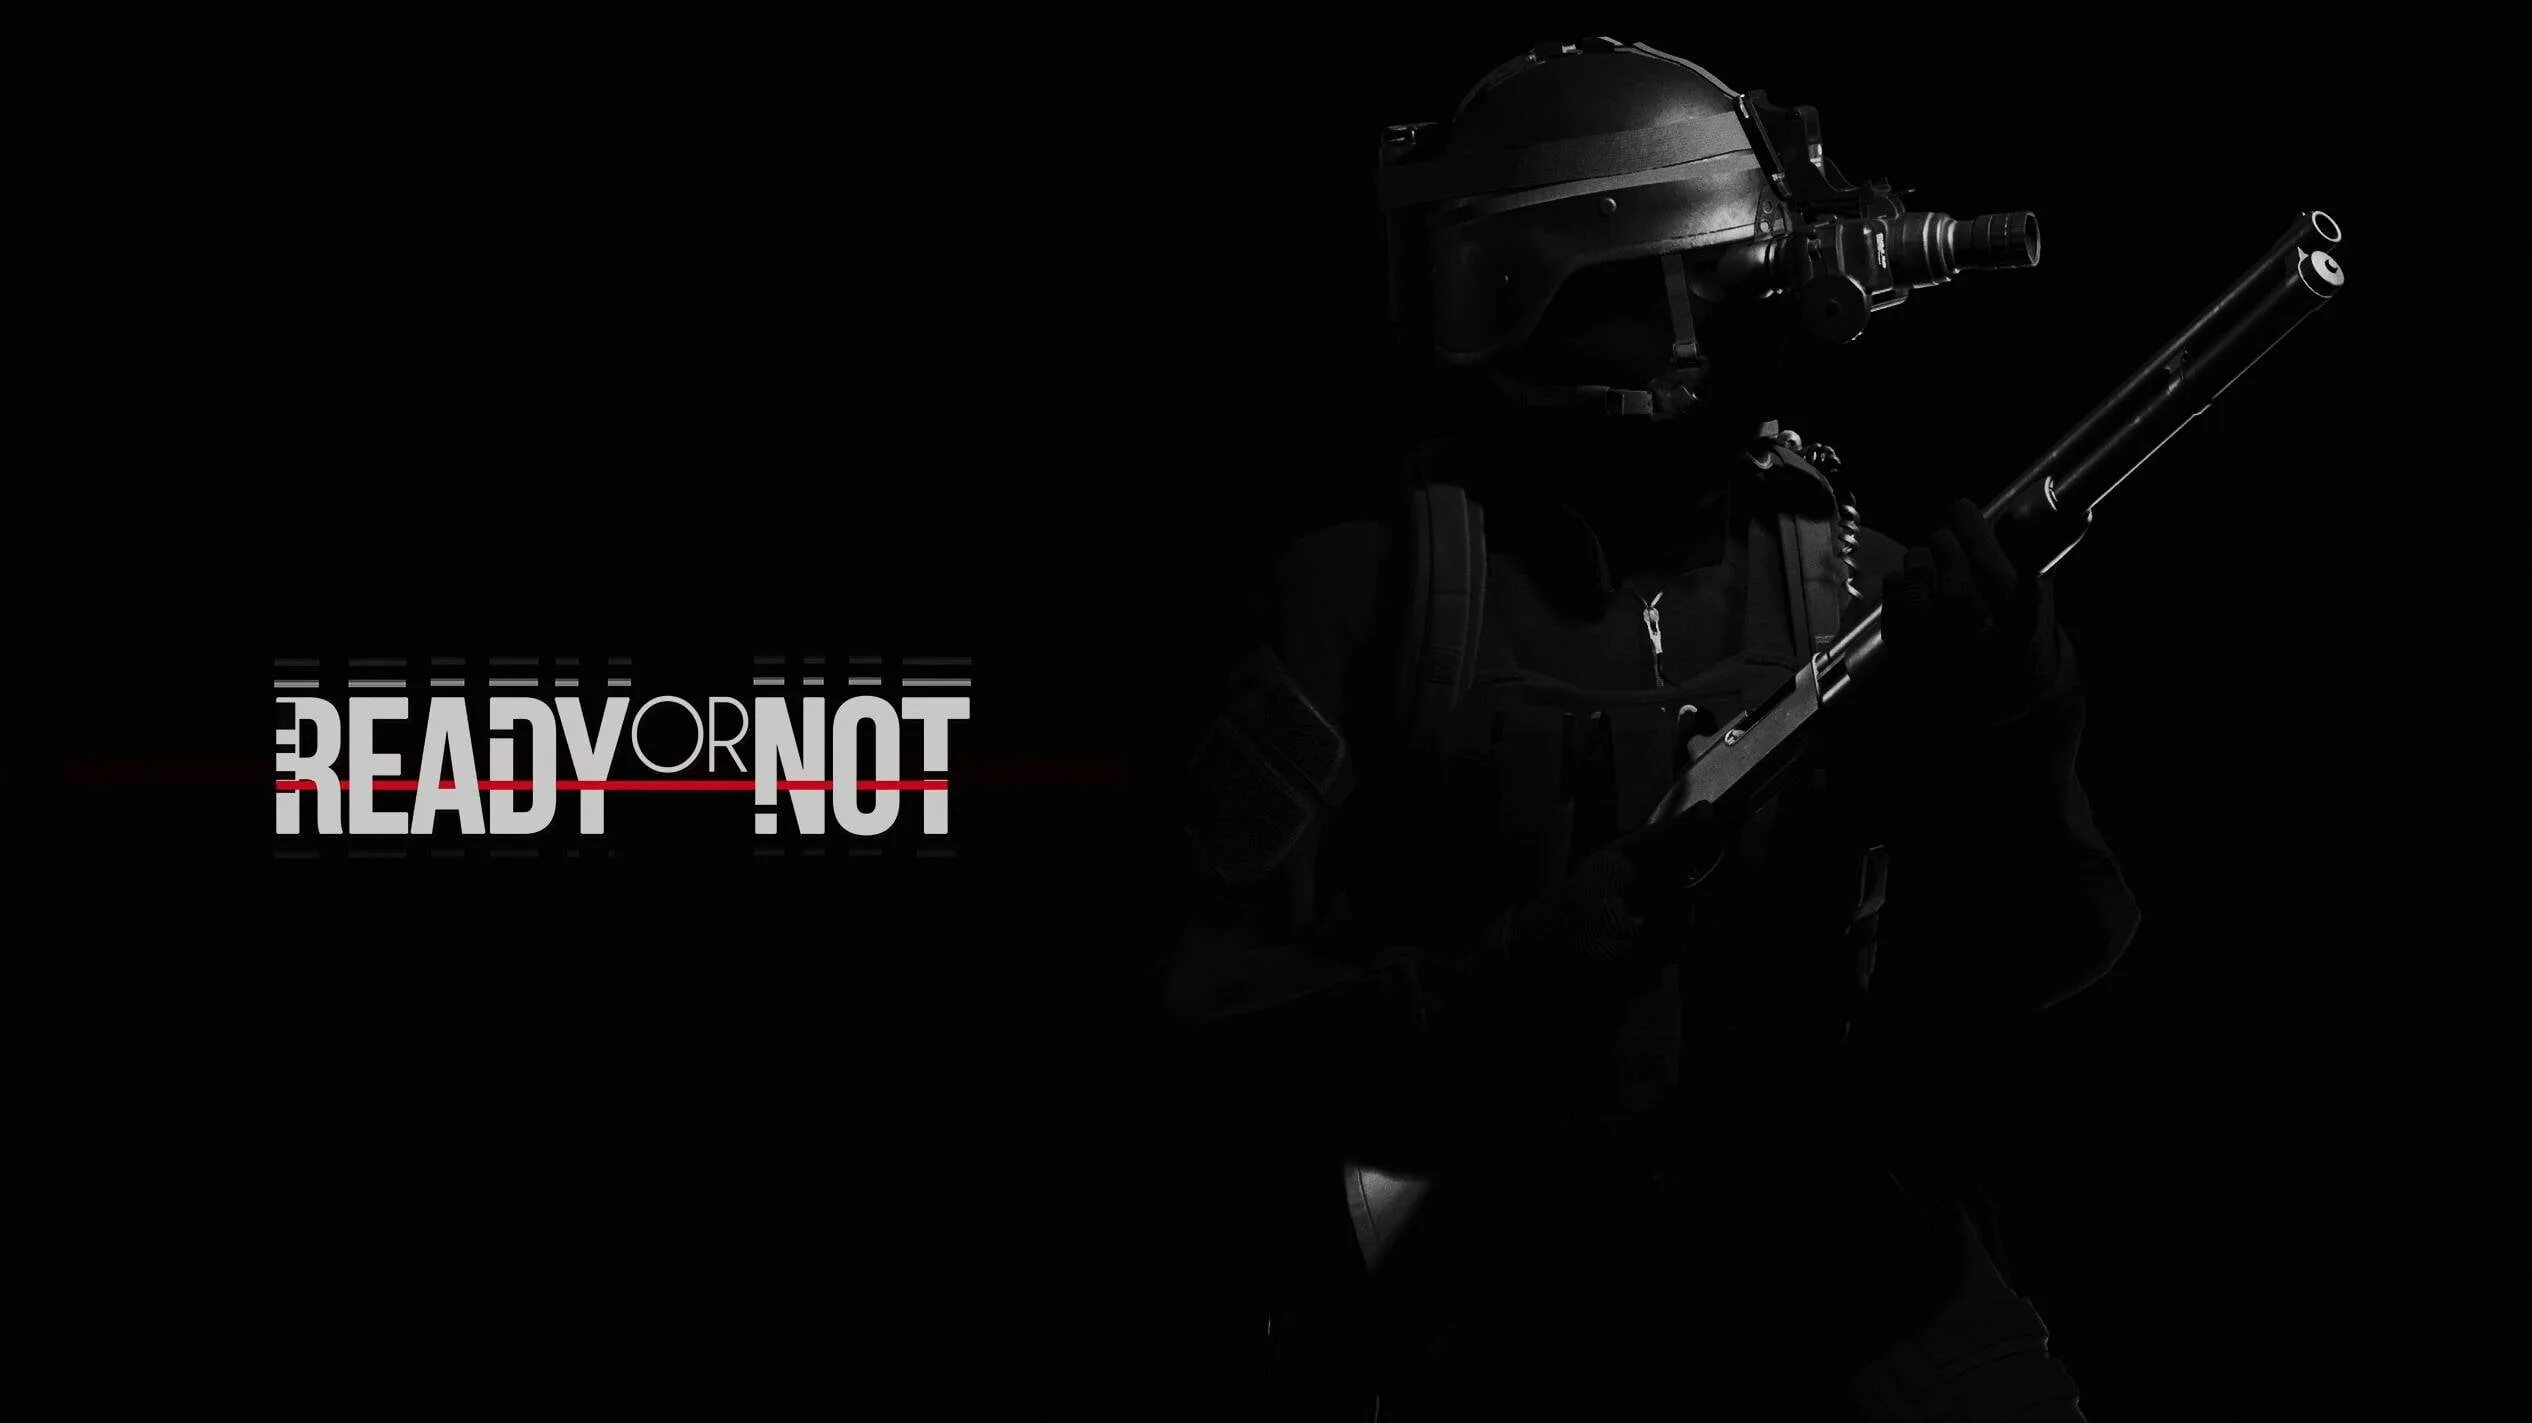 Ready or not фон. Ready or not игра. Ready or not обои. SWAT обои. Ready or not s